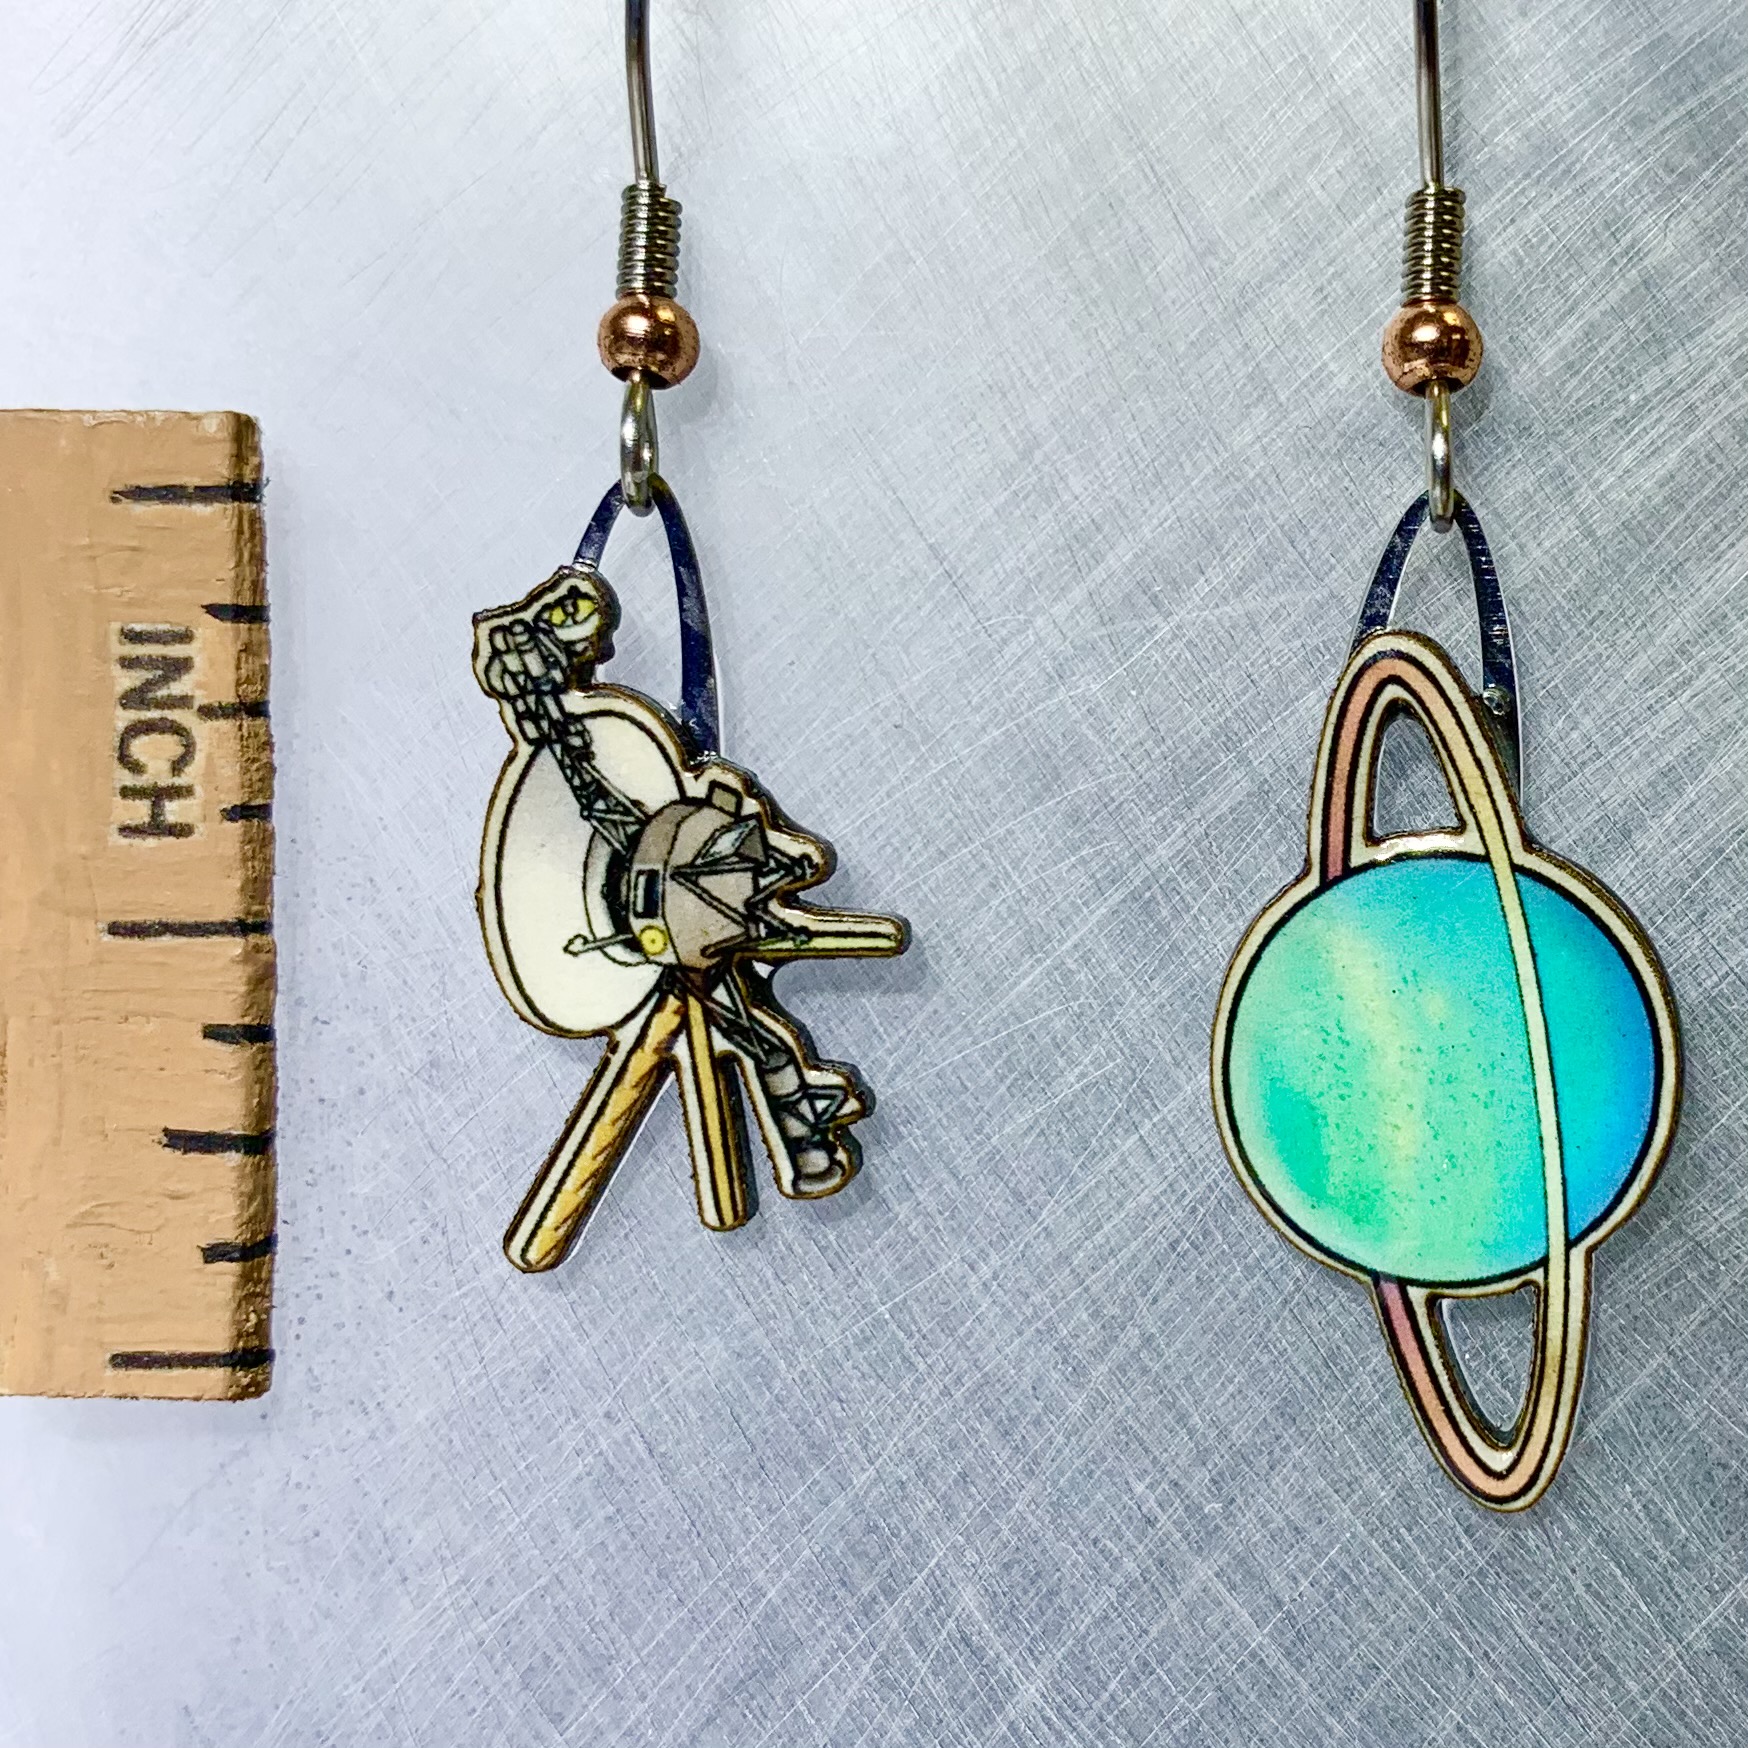 Picture shown is of 1 inch tall pair of earrings of Voyager Uranus Flyby.